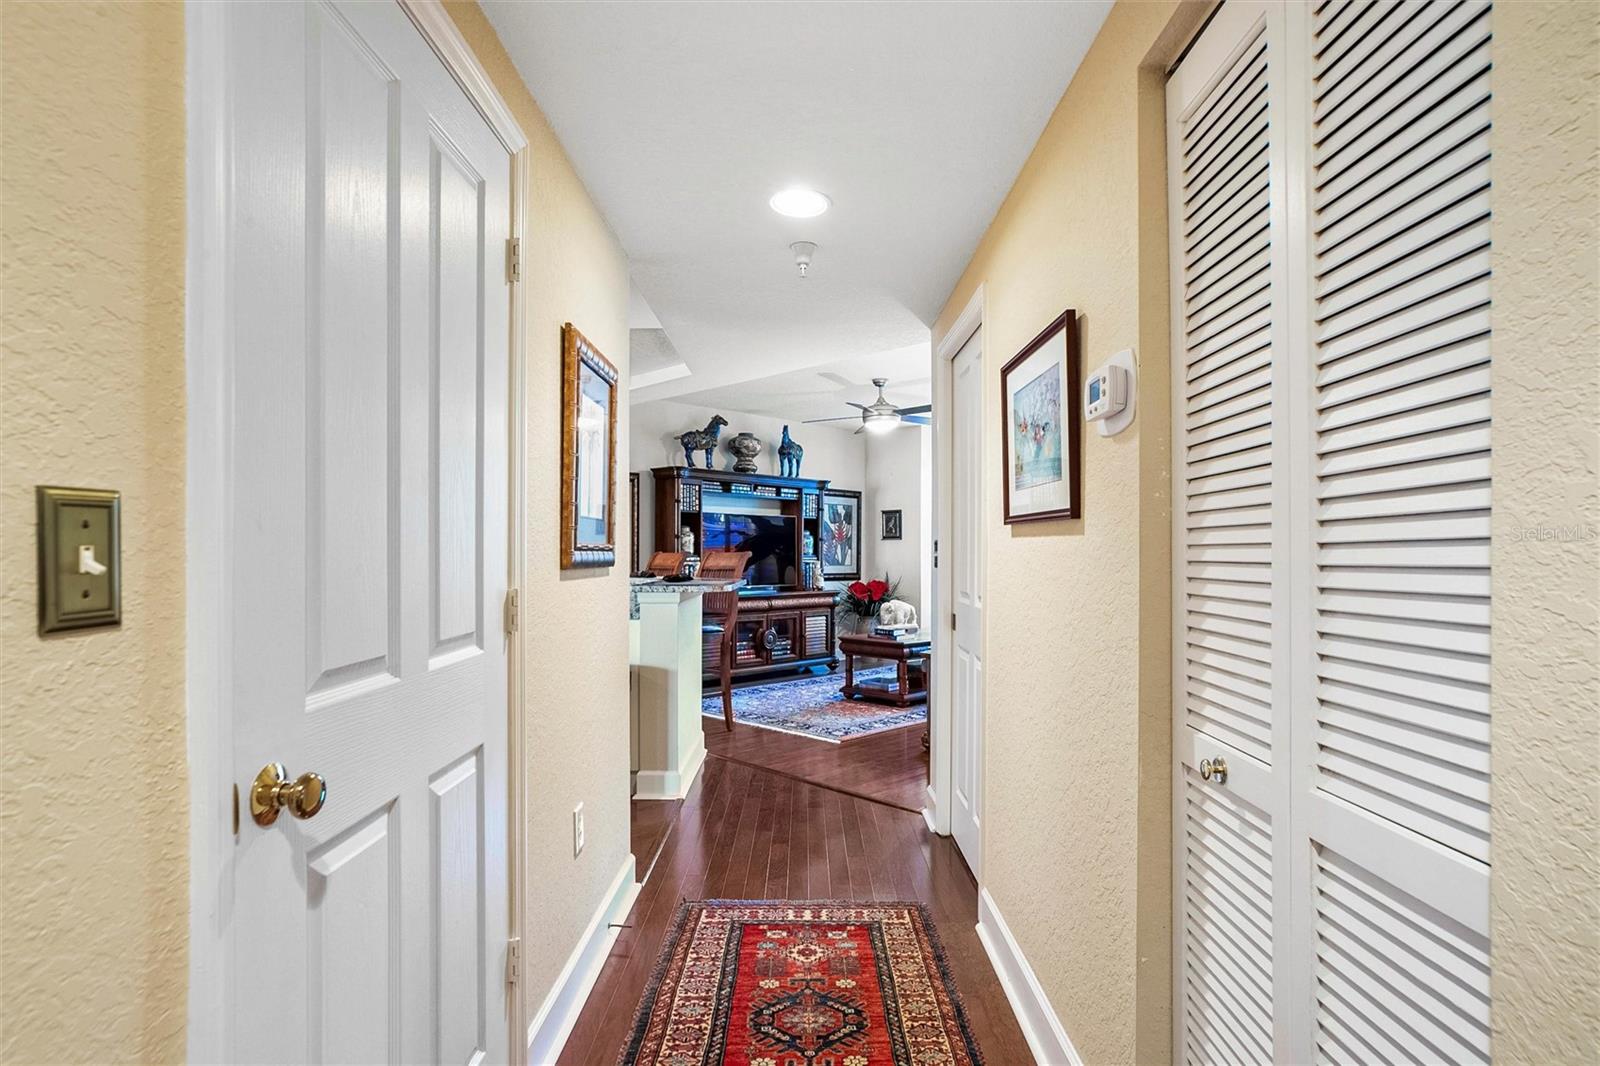 Entry into kitchen and family room